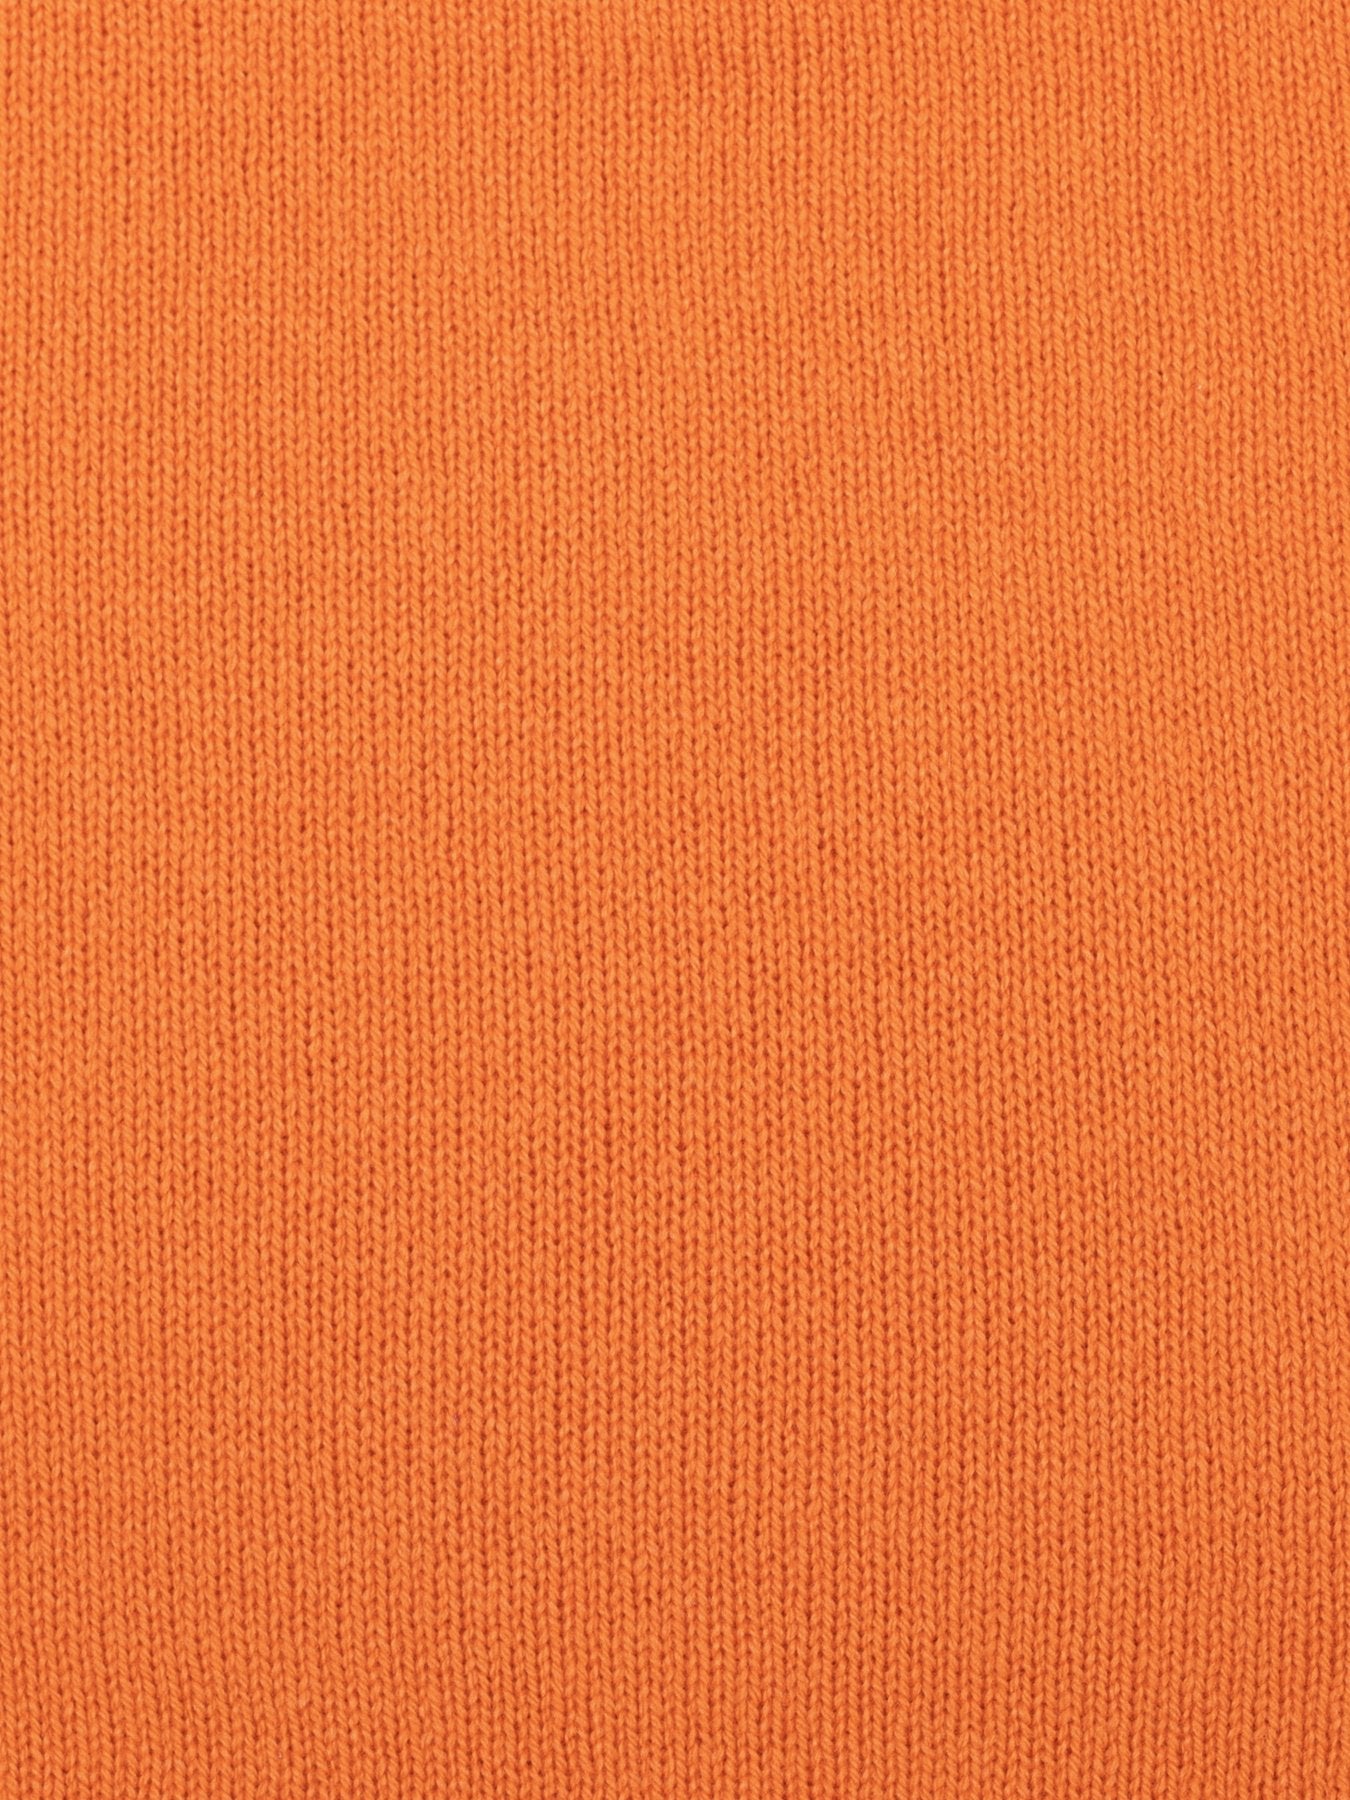 a swatch of plain single jersey knitting made from fine merino wool in an orange colour